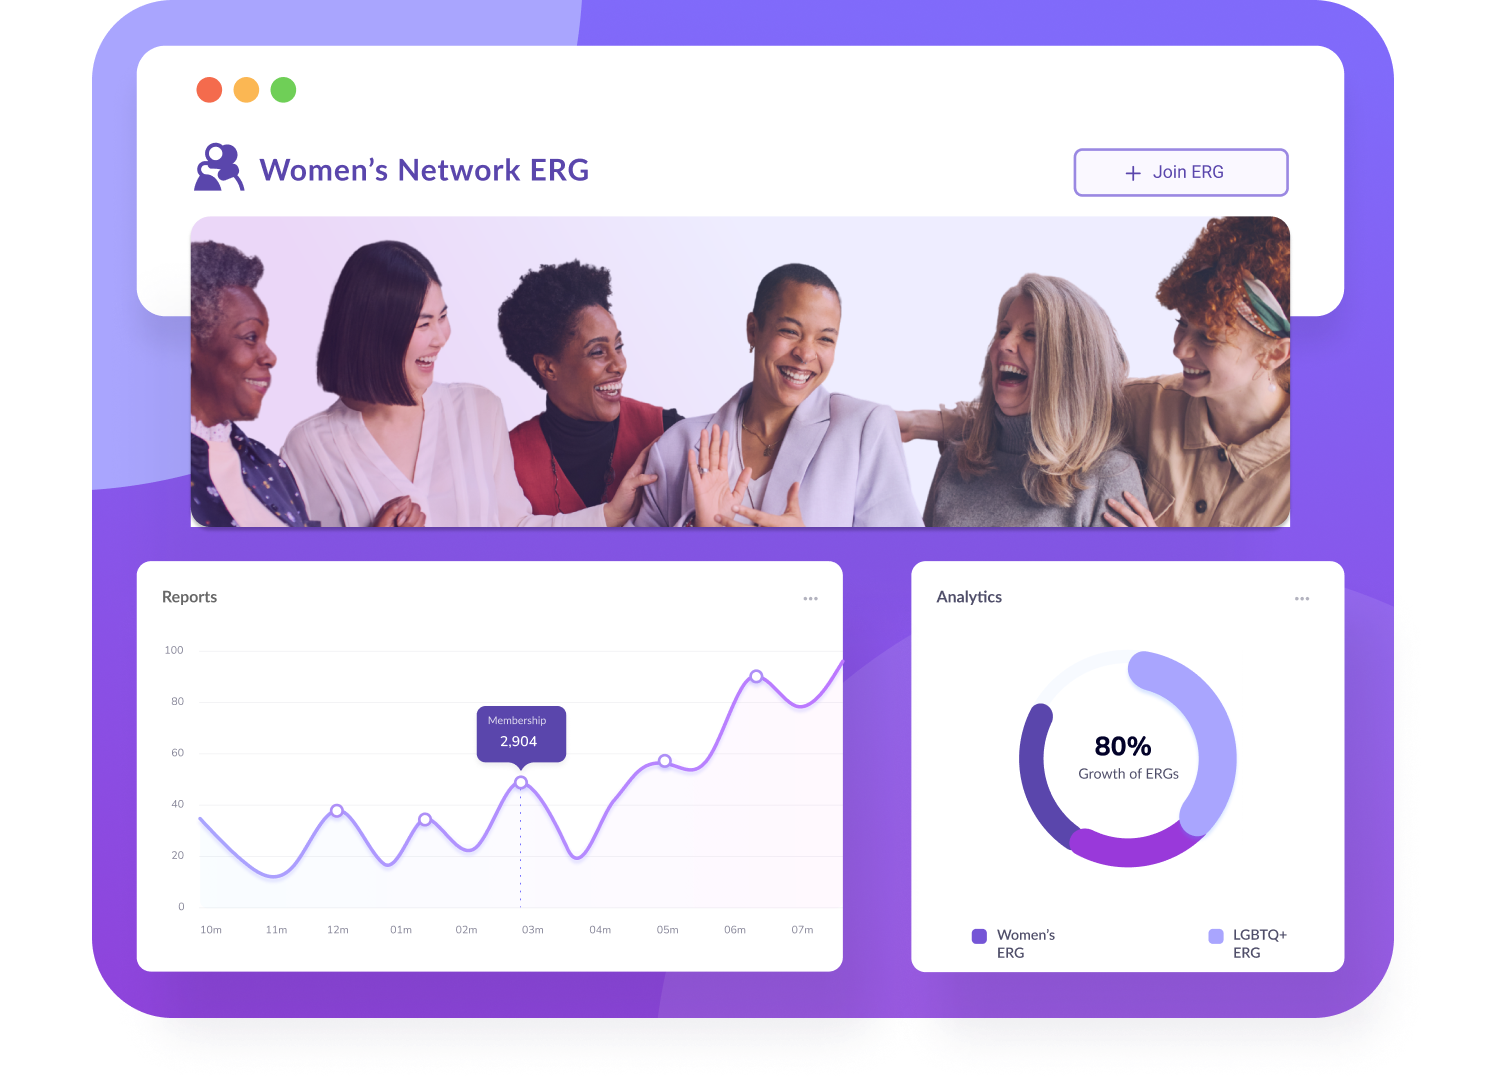 Digital dashboard for the Women's Network ERG featuring a photo of five diverse women laughing together. The dashboard displays a line graph titled 'Reports' with a membership count of 2,904 and an analytics pie chart indicating '80% Growth of ERGs' with segments for Women's ERG and LGBTQ+ ERG.